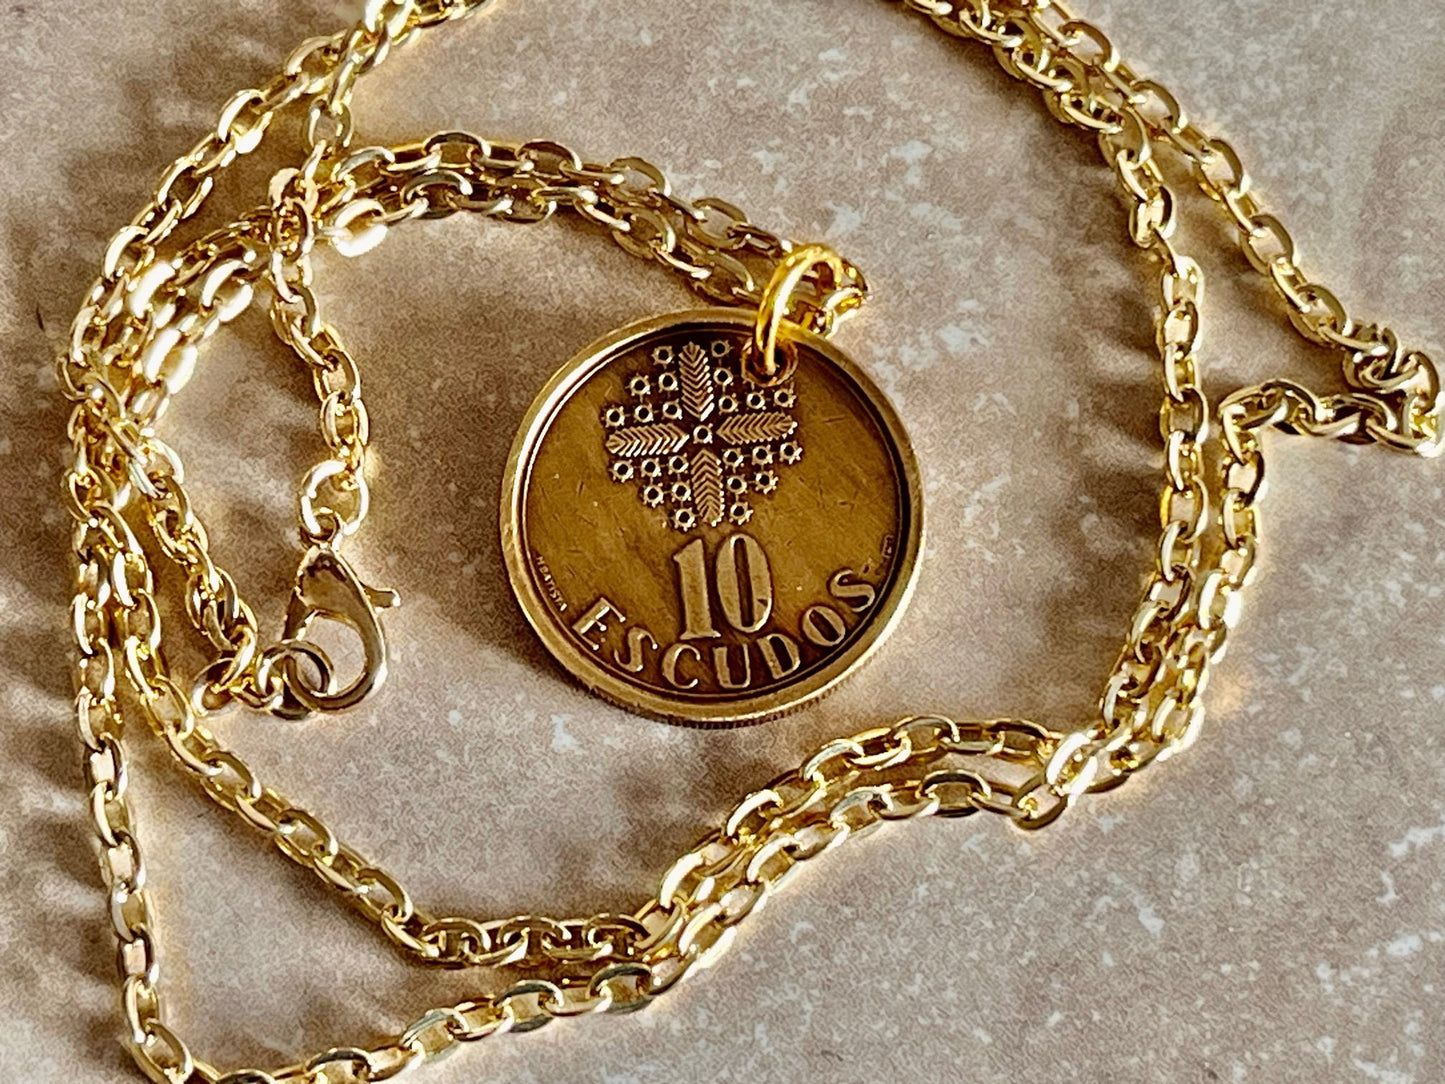 Portugal Coin Necklace Portuguese 10 Escudos Pendant Personal Vintage Handmade Jewelry Gift Friend Charm For Him Her World Coin Collector